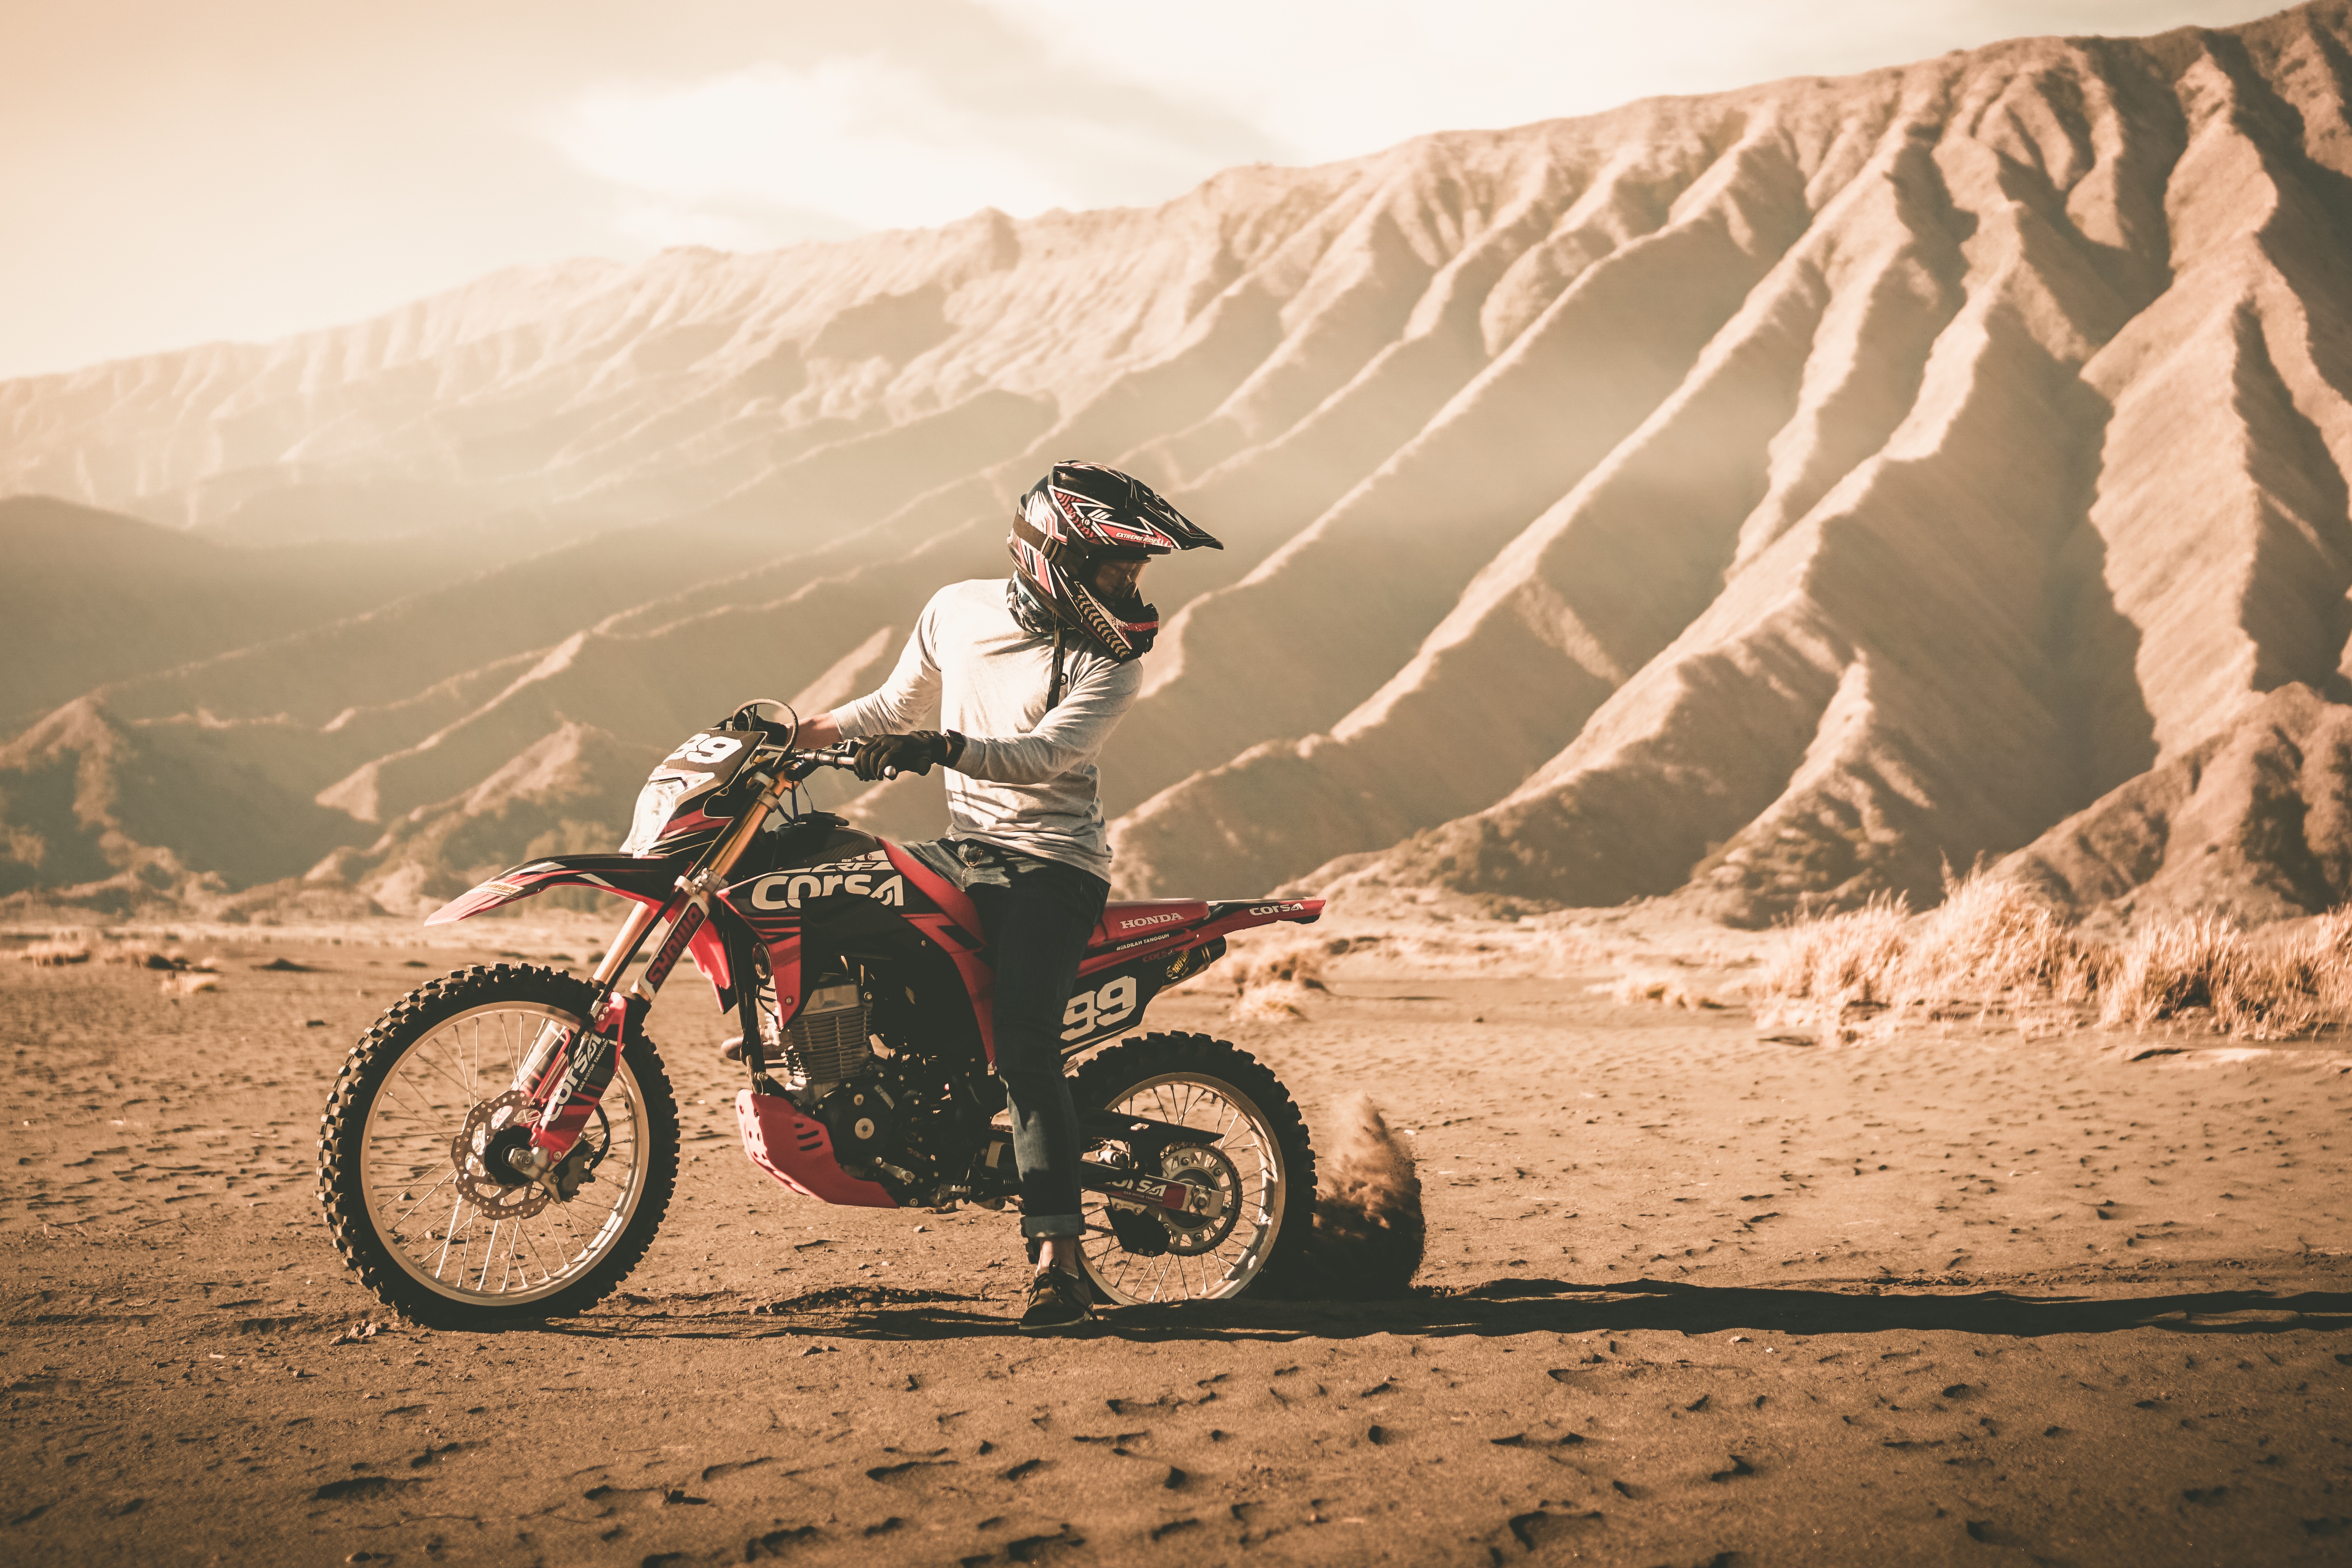 off road, motorcyclist, mountains, sand, motorcycles, helmet, motorcycle, impassability, cross